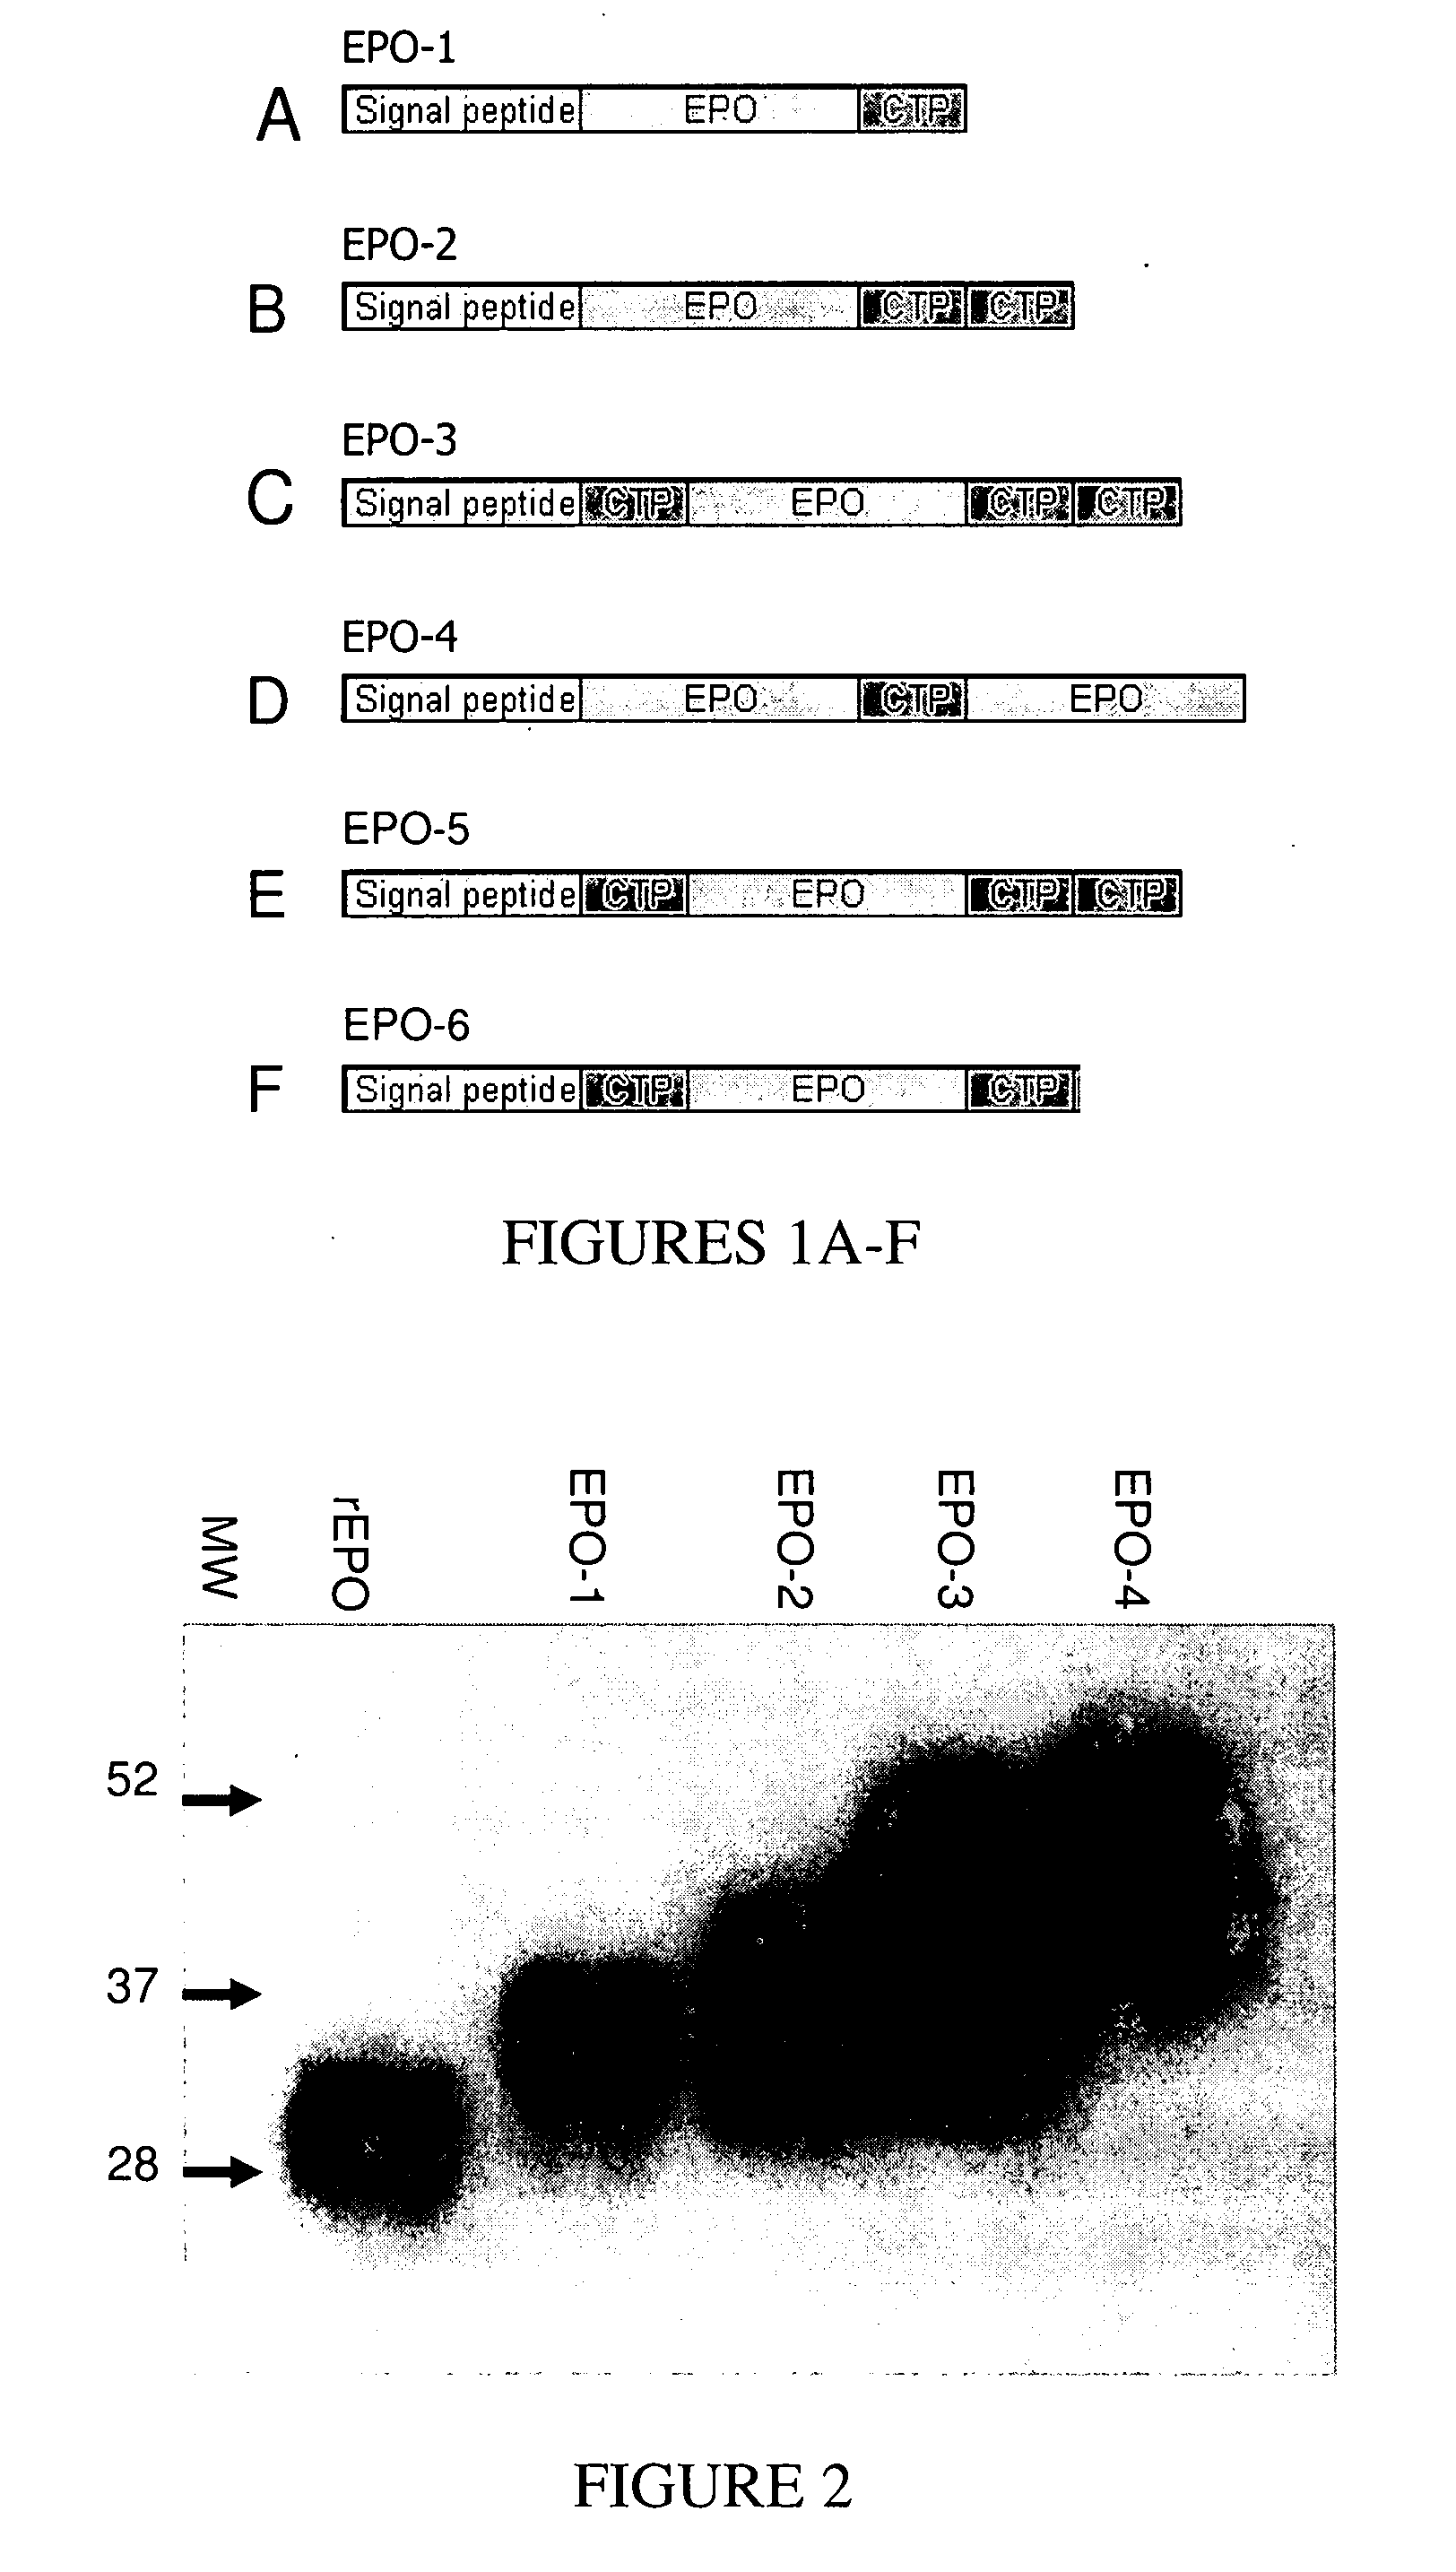 Long-acting veterinary polypeptides and methods of producing and administering same